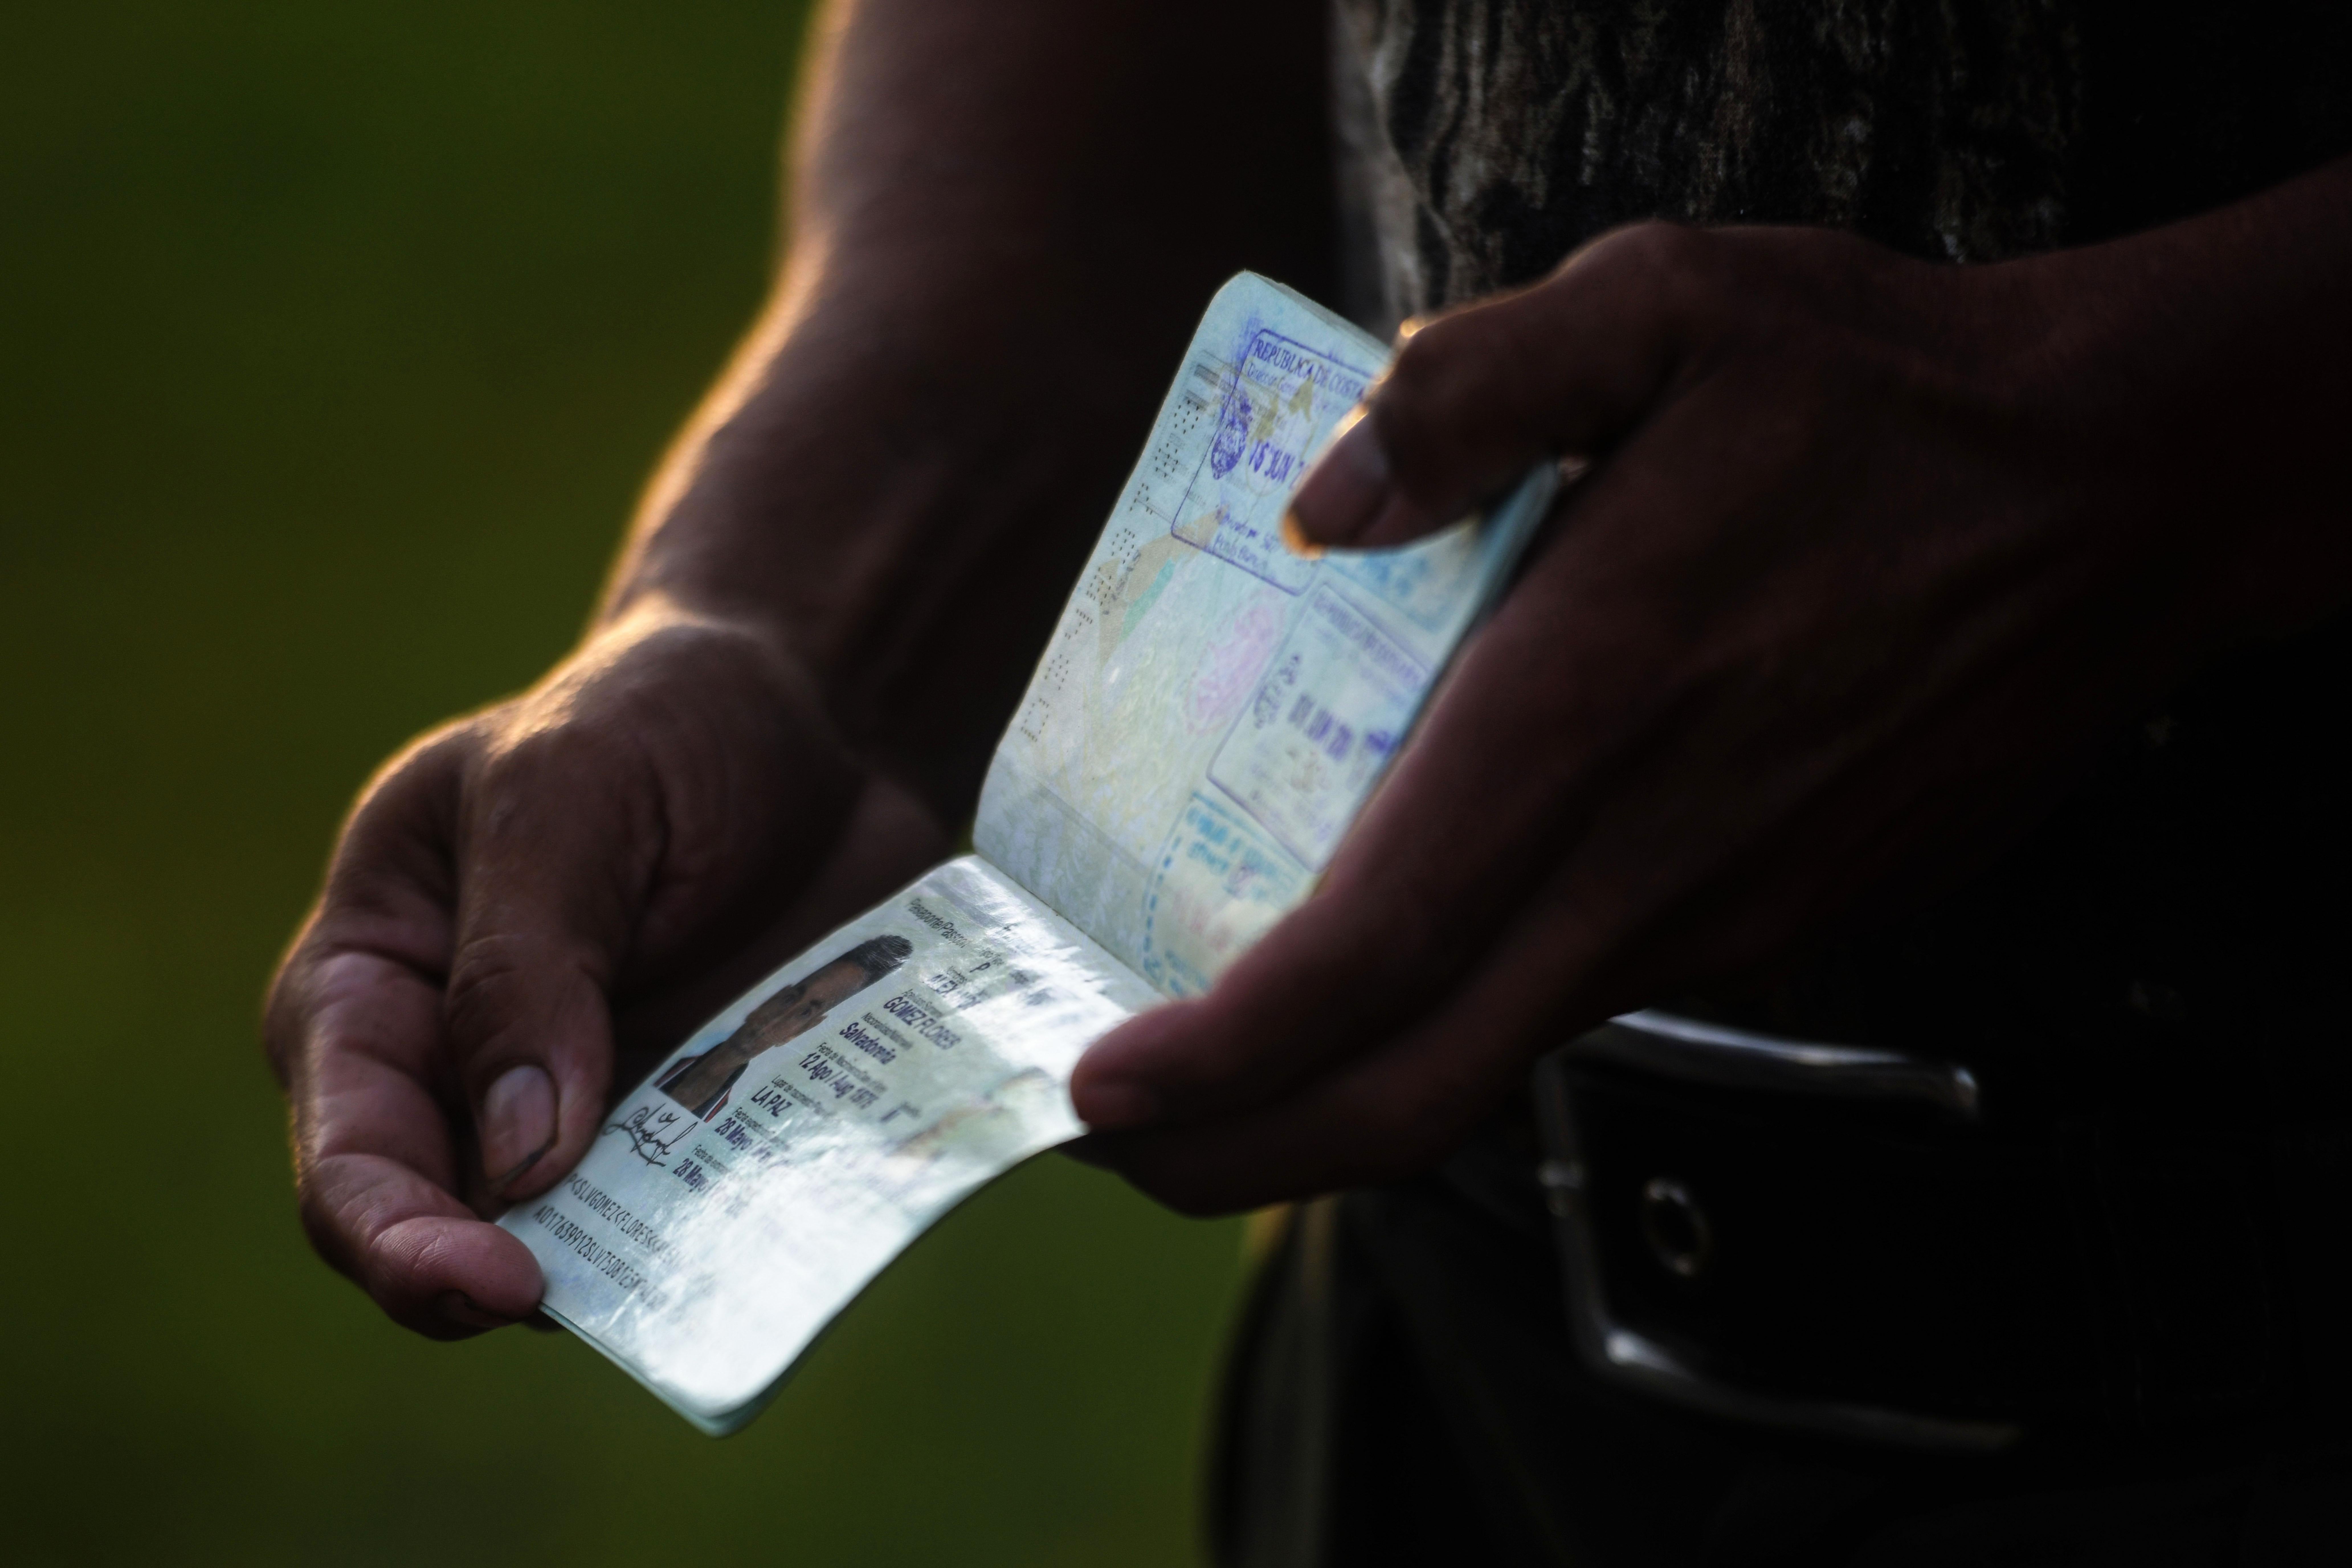 A Salvadoran migrant shows his passport as he gathers in a caravan in San Salvador to start a journey towards the U.S. on Oct. 28, 2018.